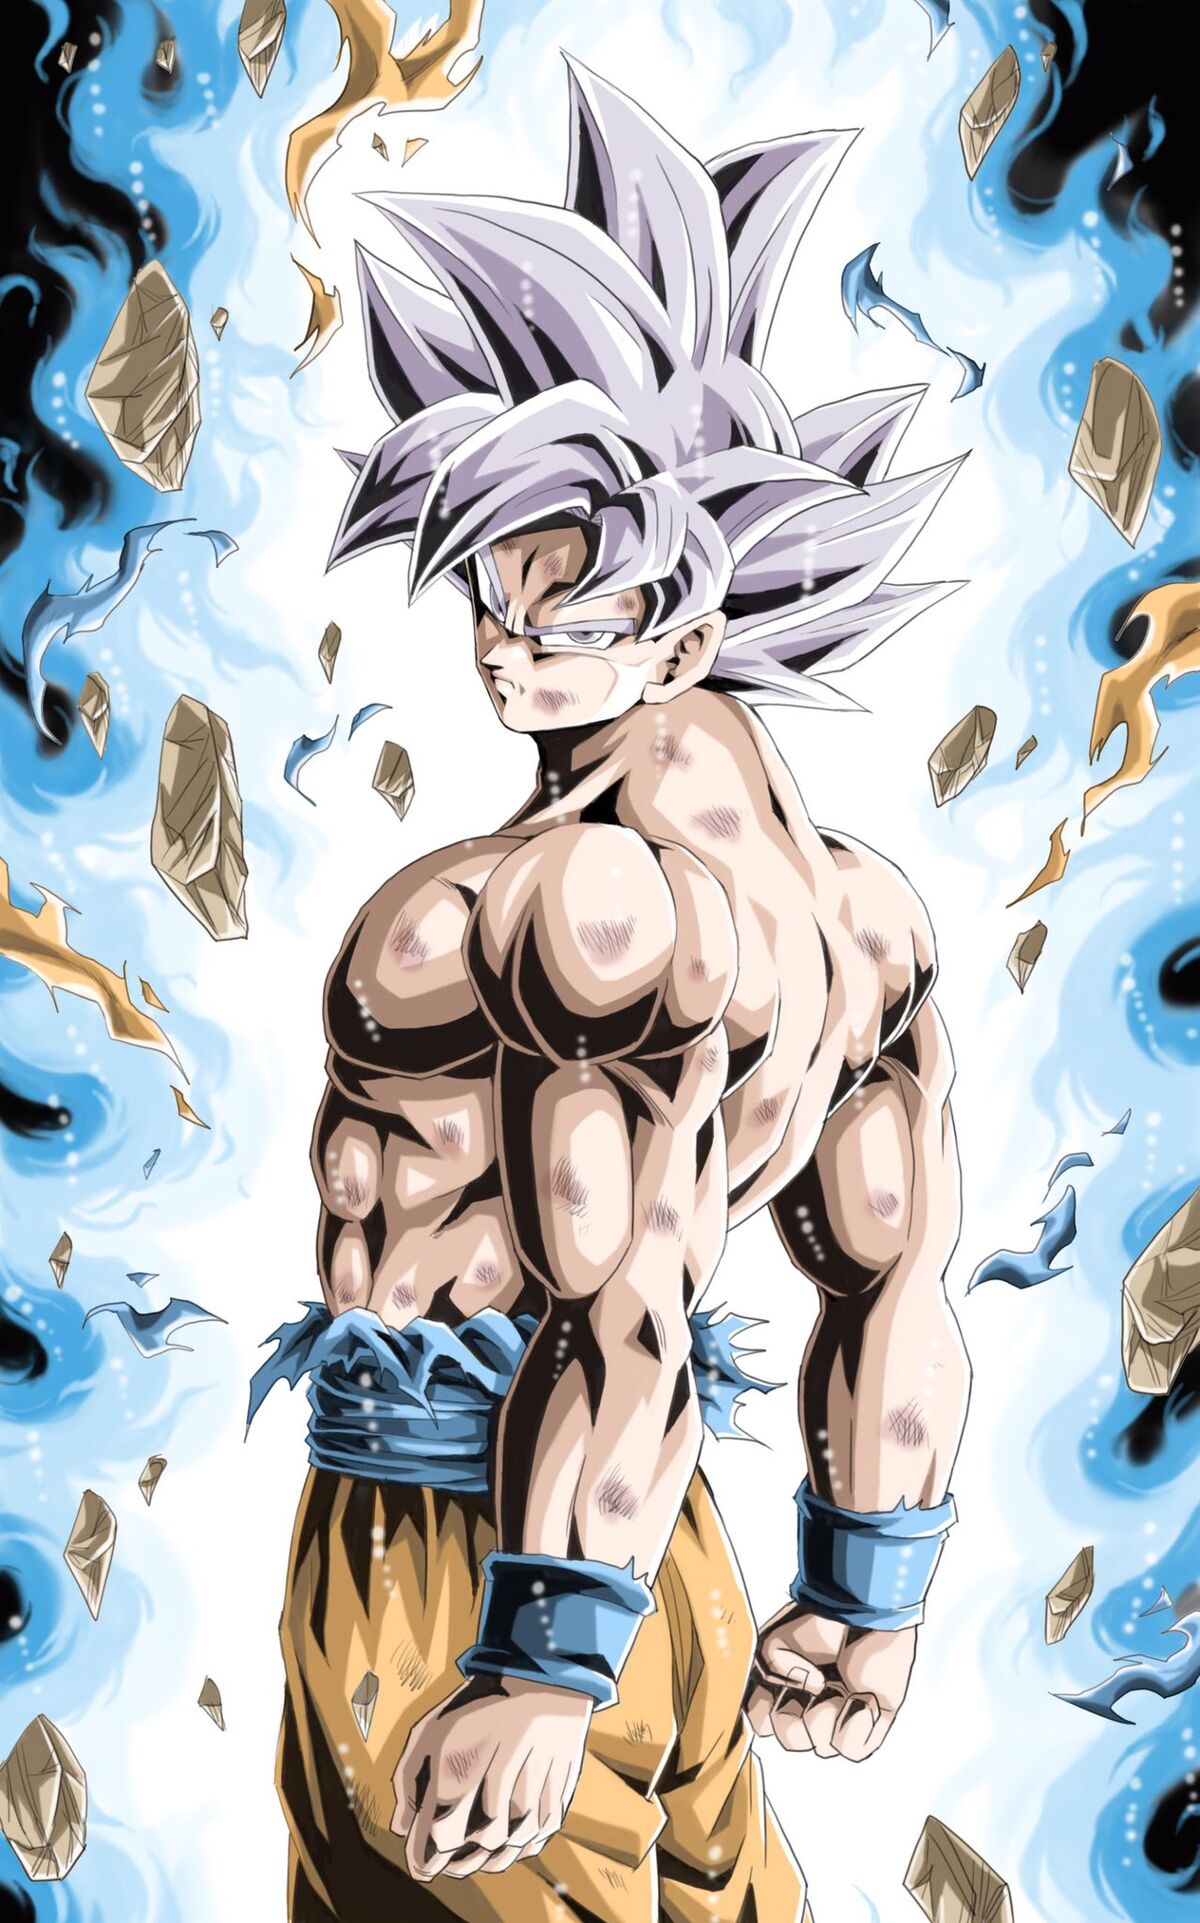 If Goku can shake the World of Void, does that mean he is